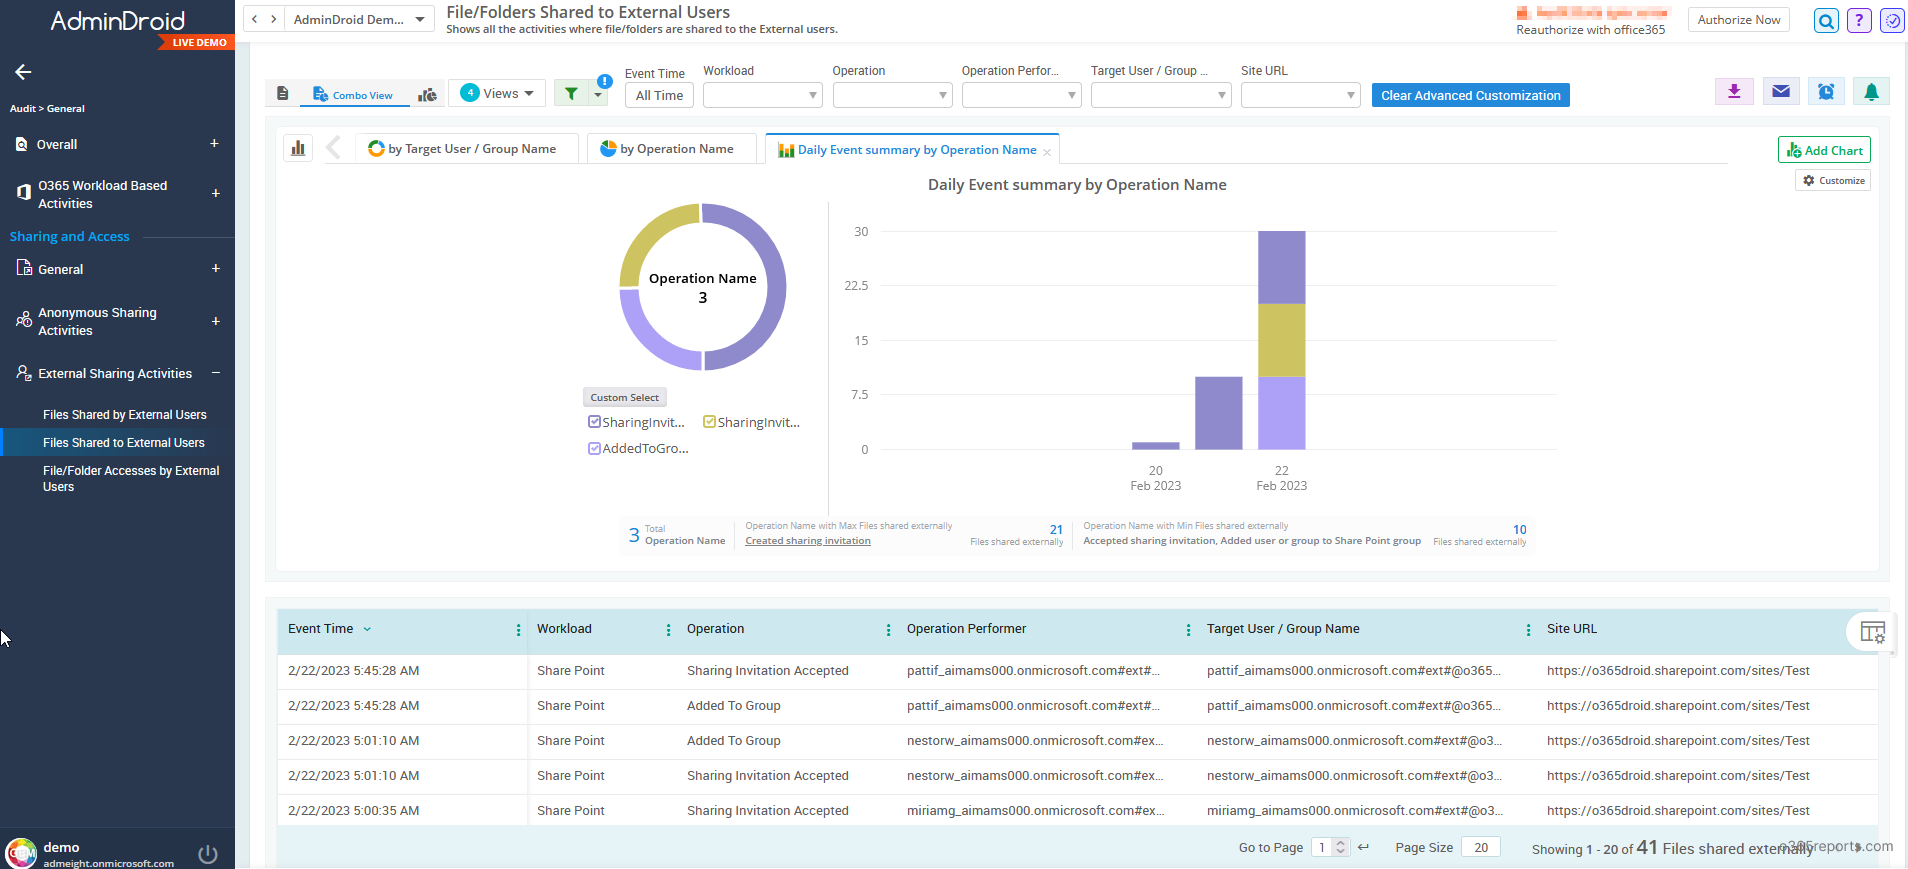 SharePoint Online external sharing report by AdminDroid